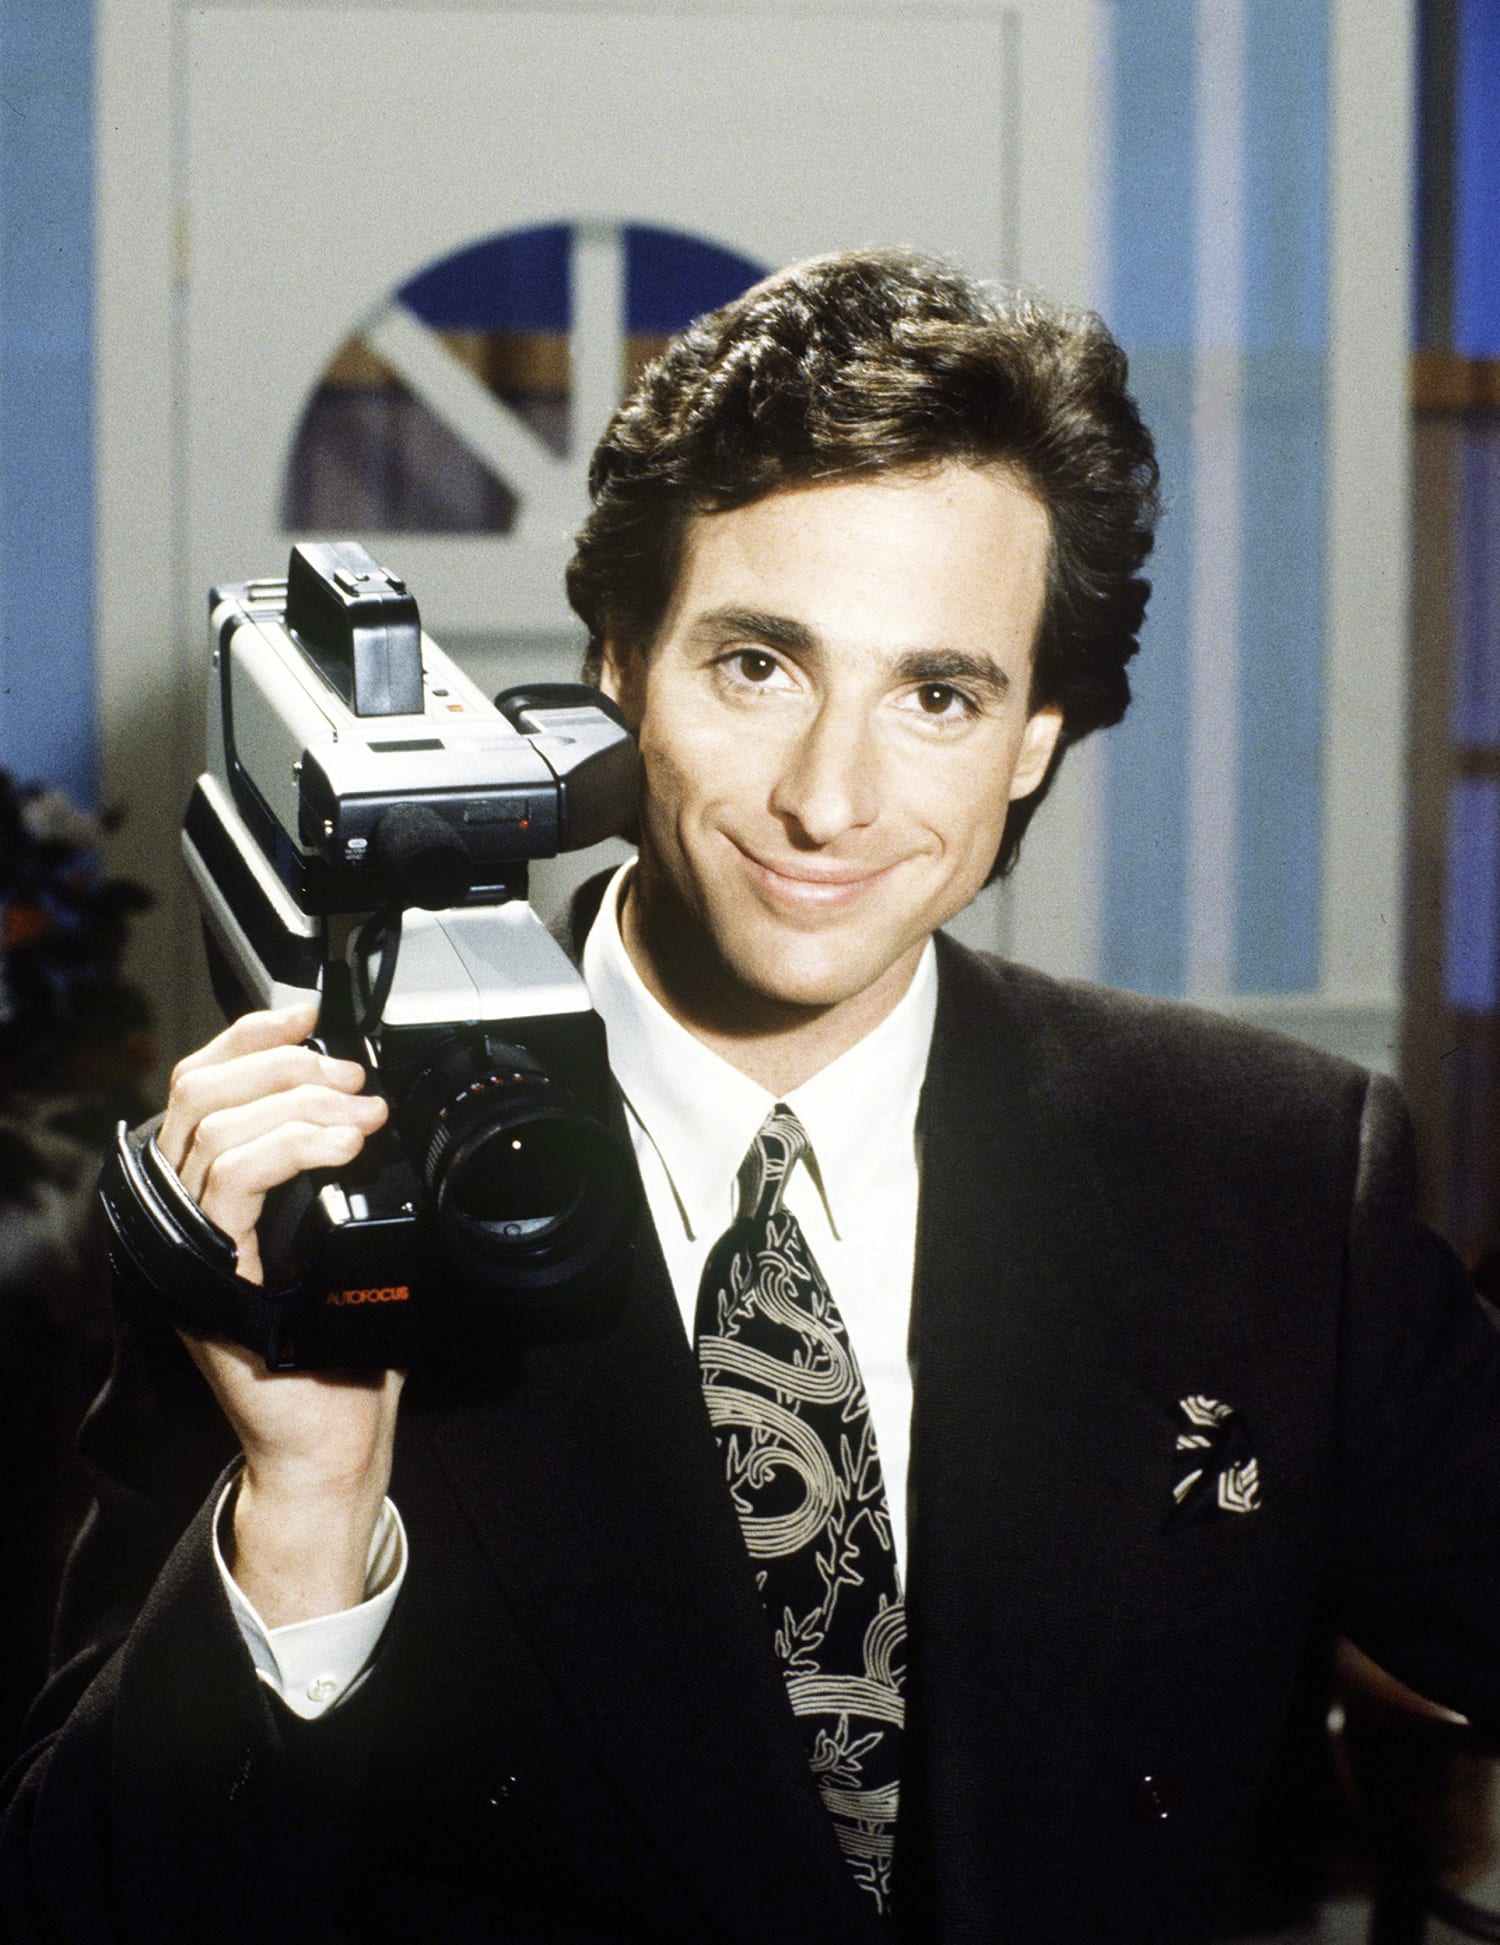 Bob Saget to host a 'dark' spinoff of 'America's Funniest Home Videos'